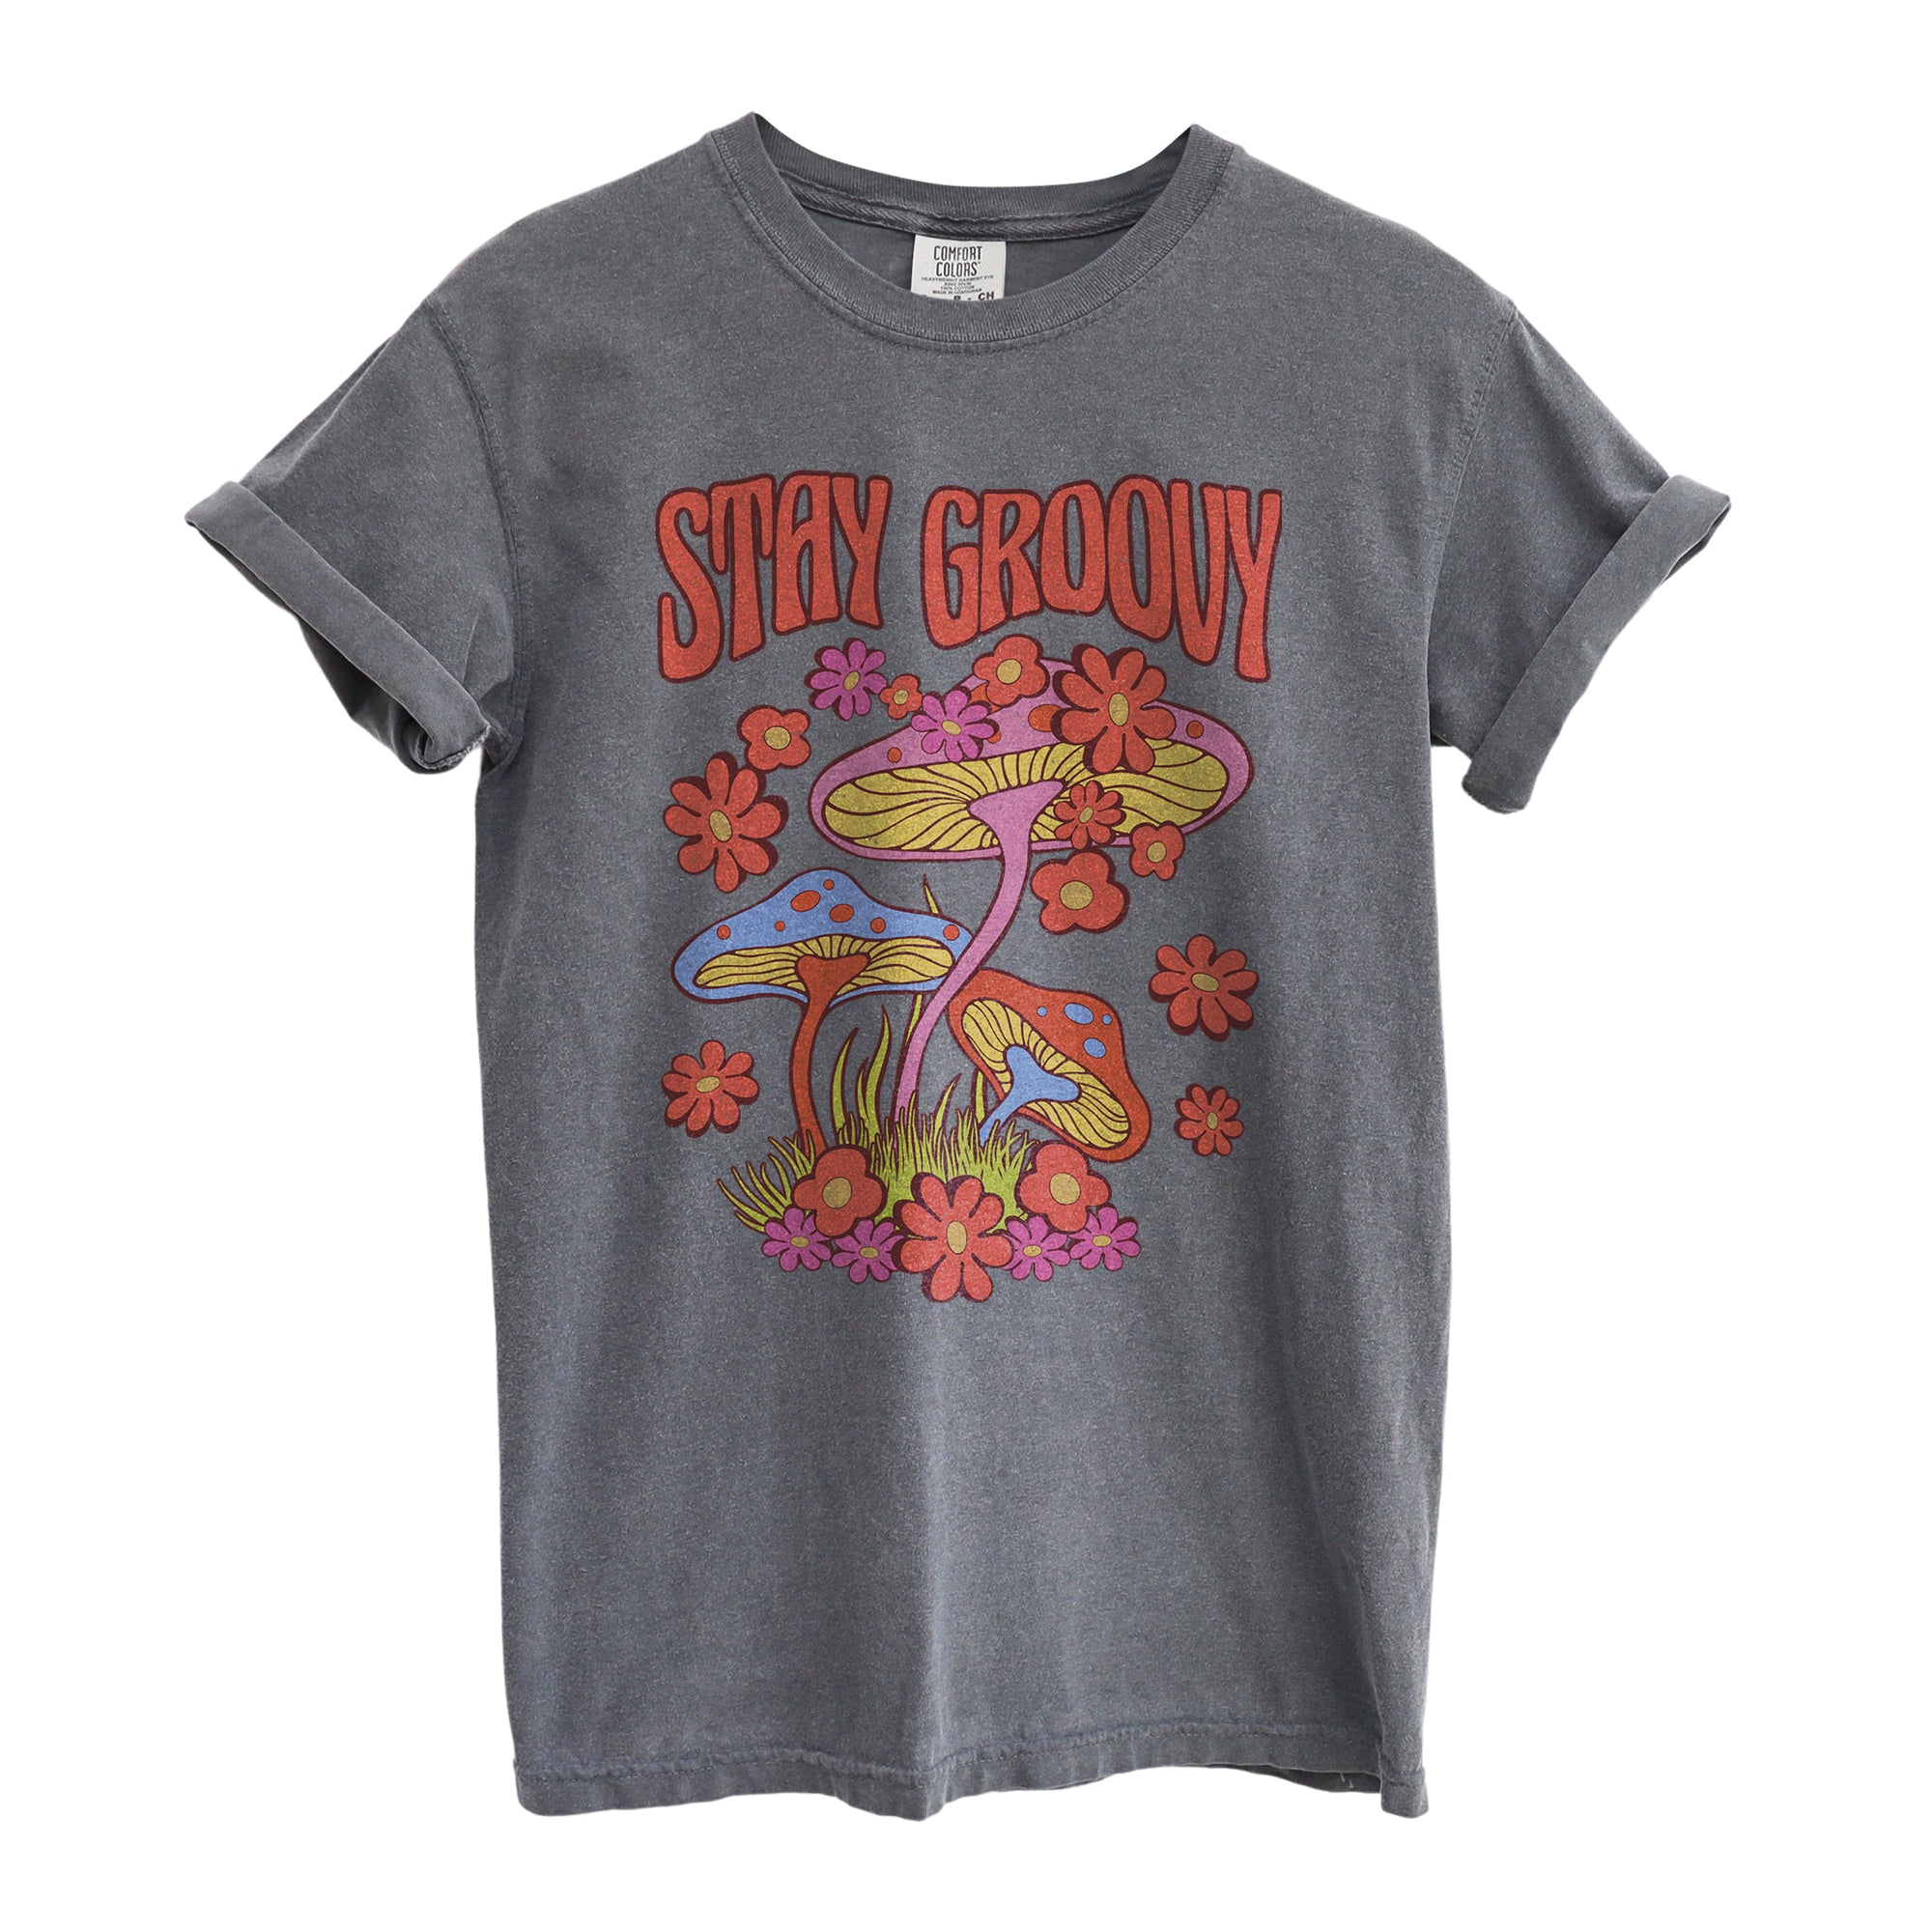 Stay Groovy Oversized Shirt Garment-Dyed Graphic Tee